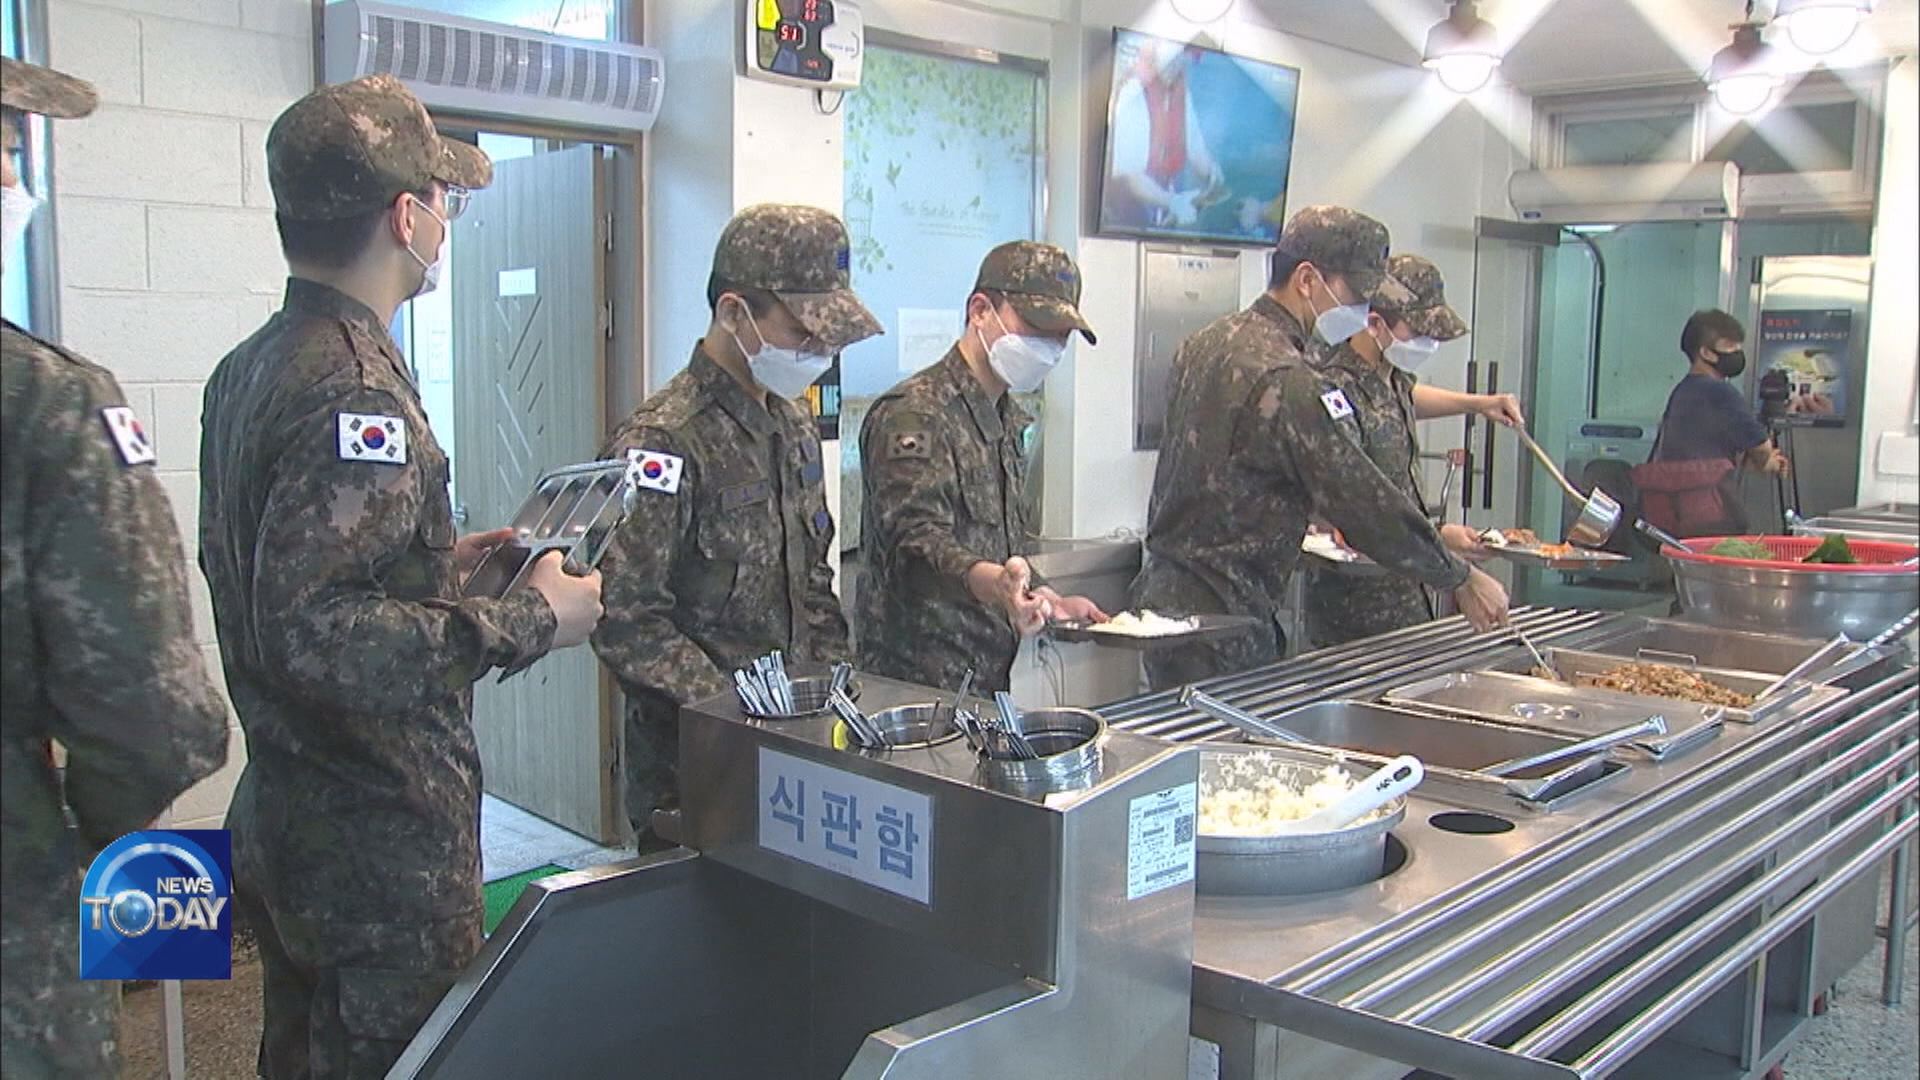 MILITARY ADOPTS NEW FOOD SYSTEM